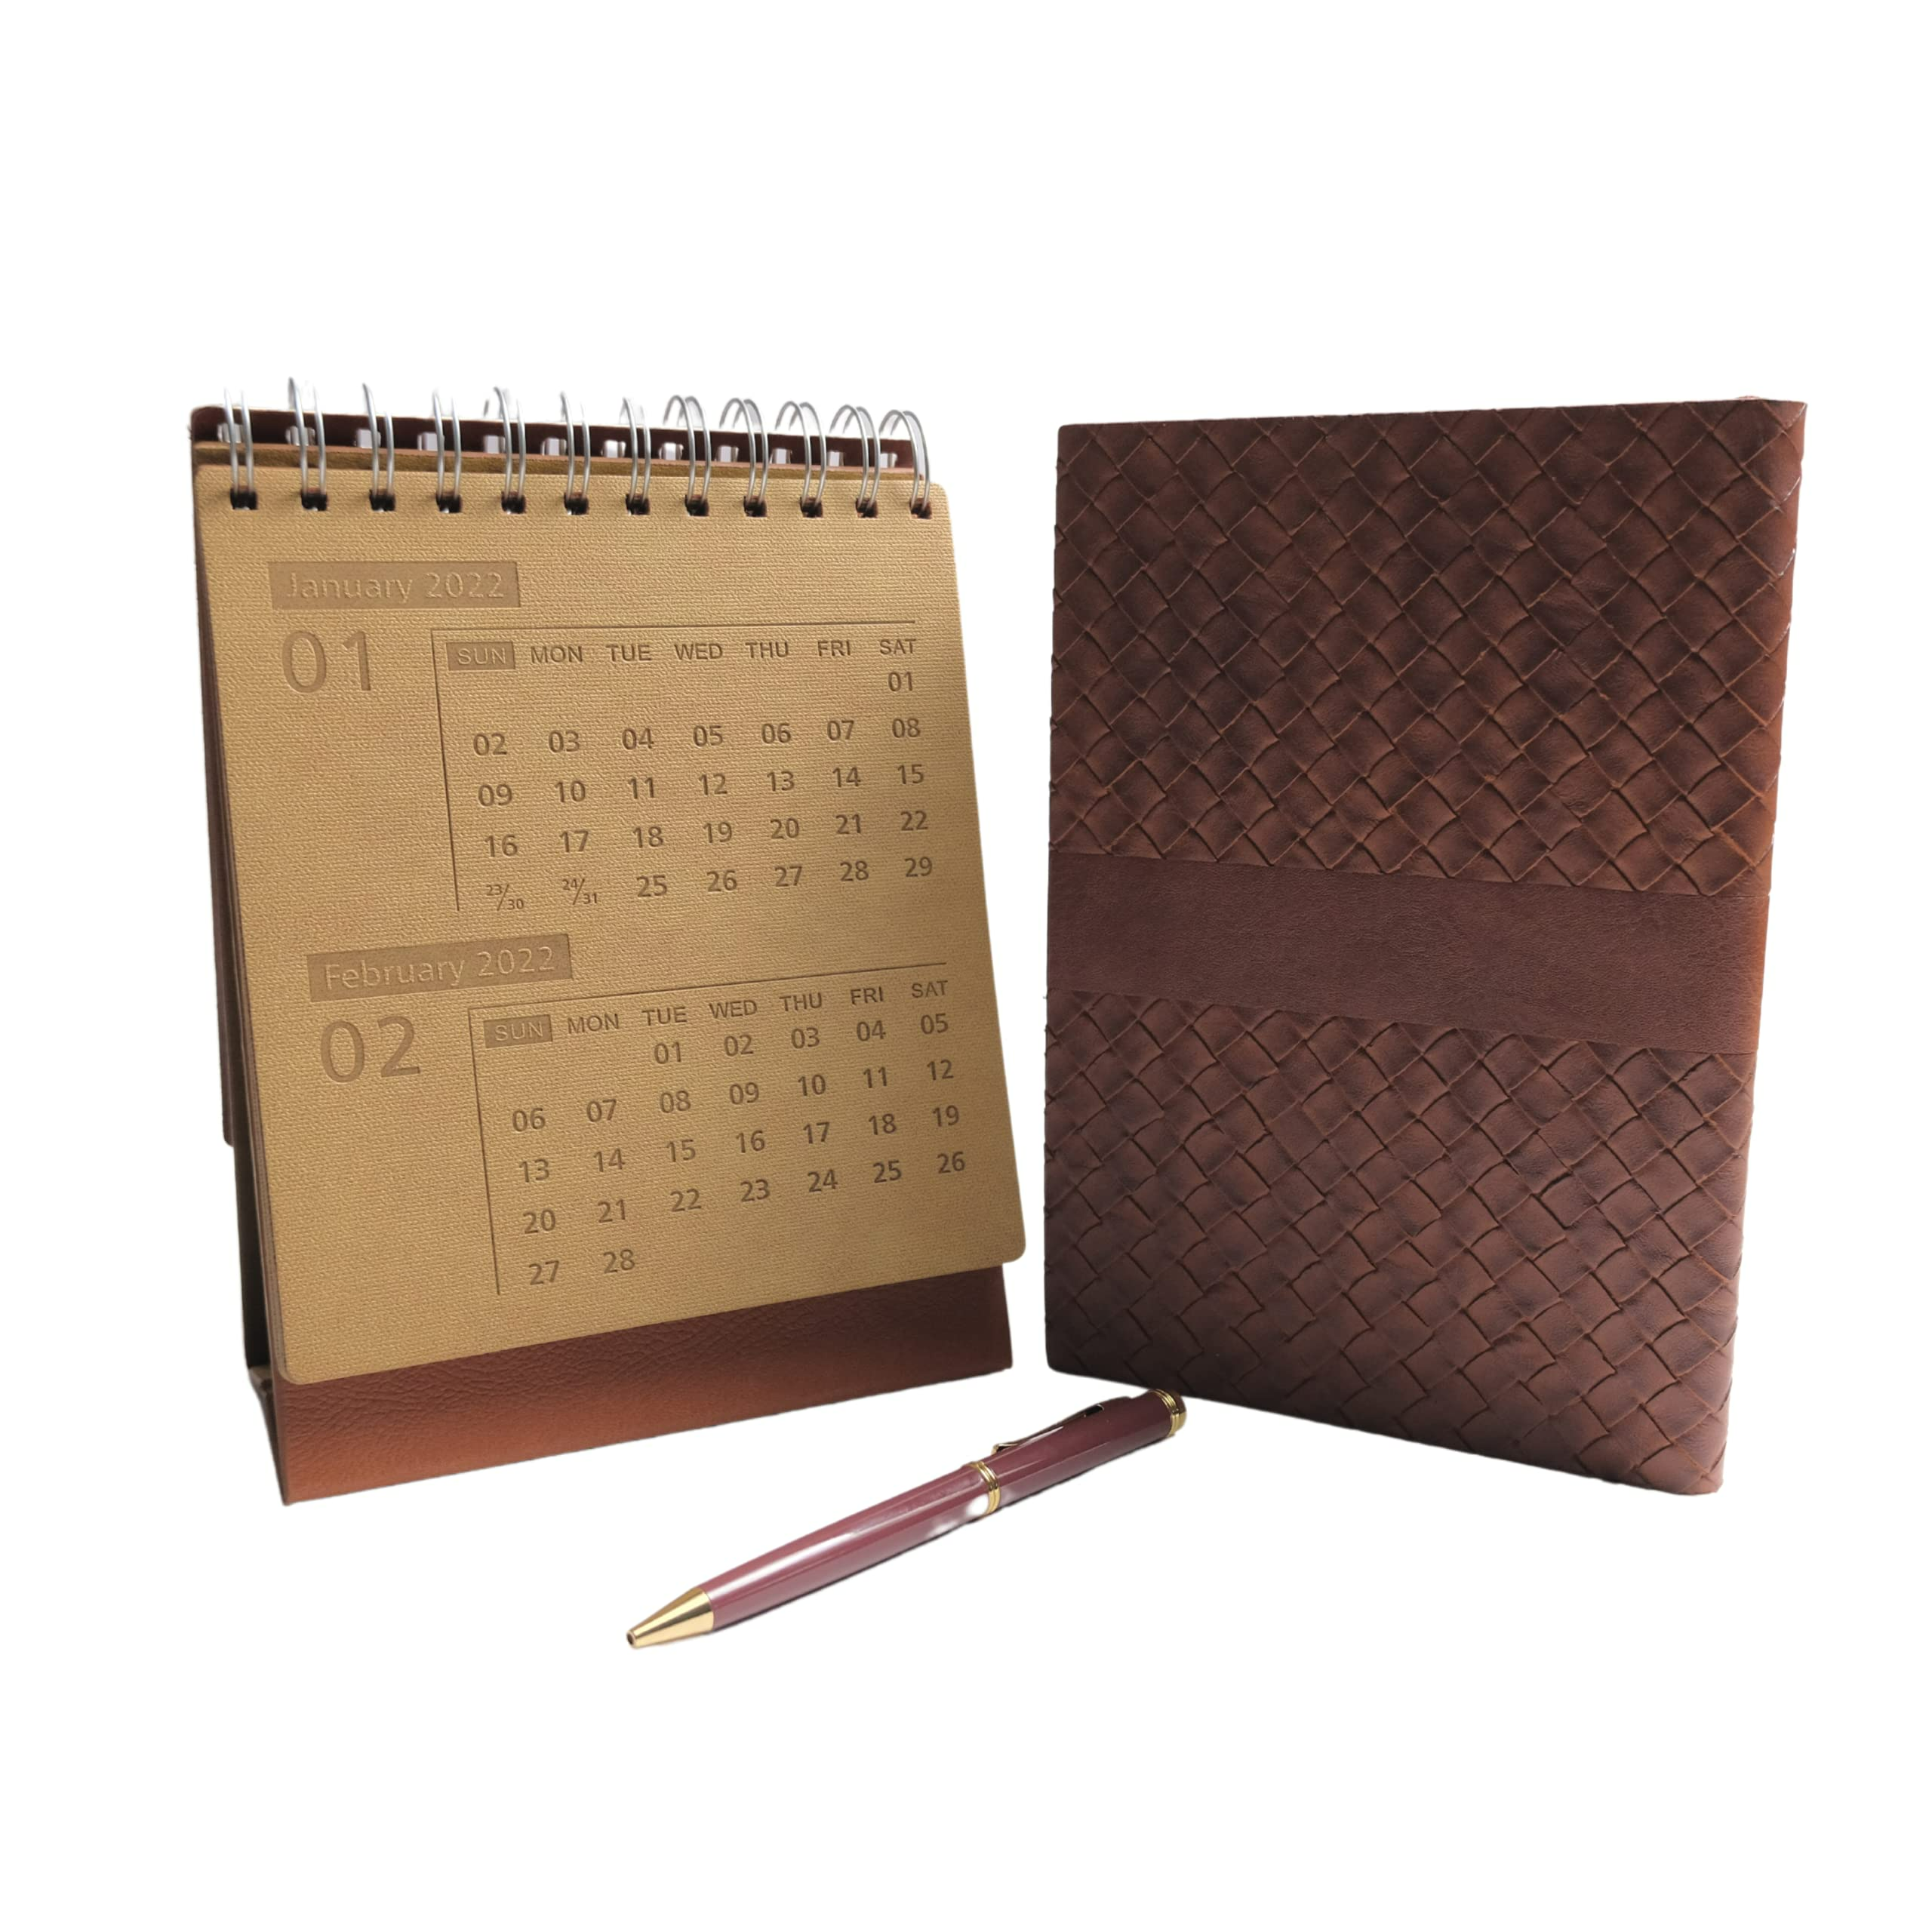 DurmarShana BIBELOT 4-in-1 Leather Combo with Pen, Planner Diary, Diaries, and 2022 Calendar.